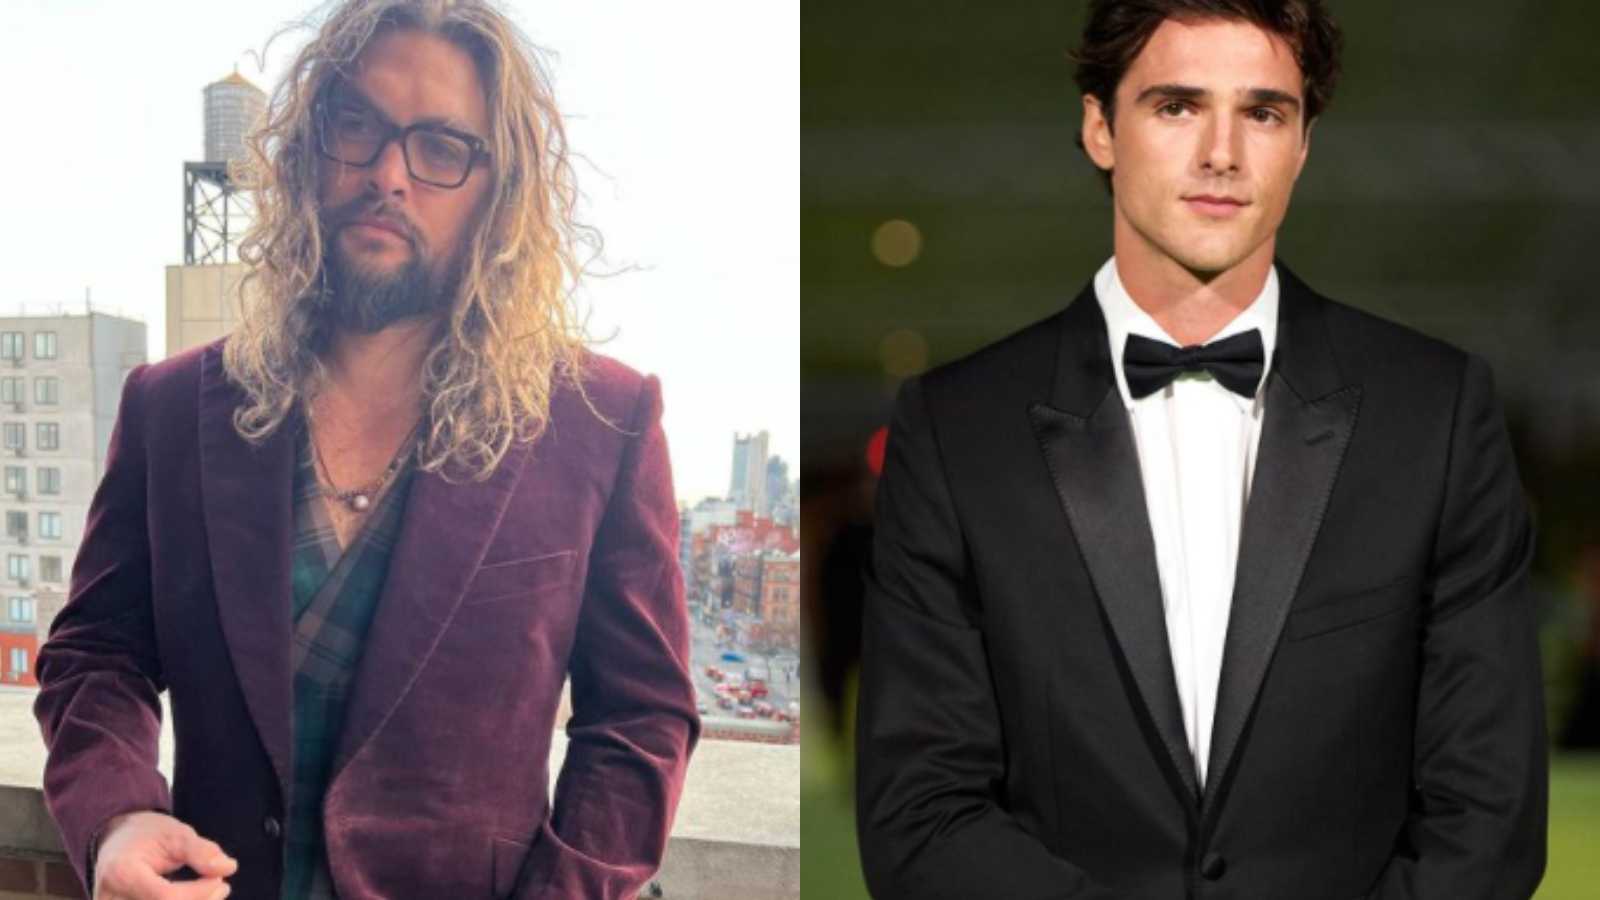 Oscars 2022: Jacob Elordi, Jason Momoa, Jake Gyllenhaal and others get included in the new presenter’s list